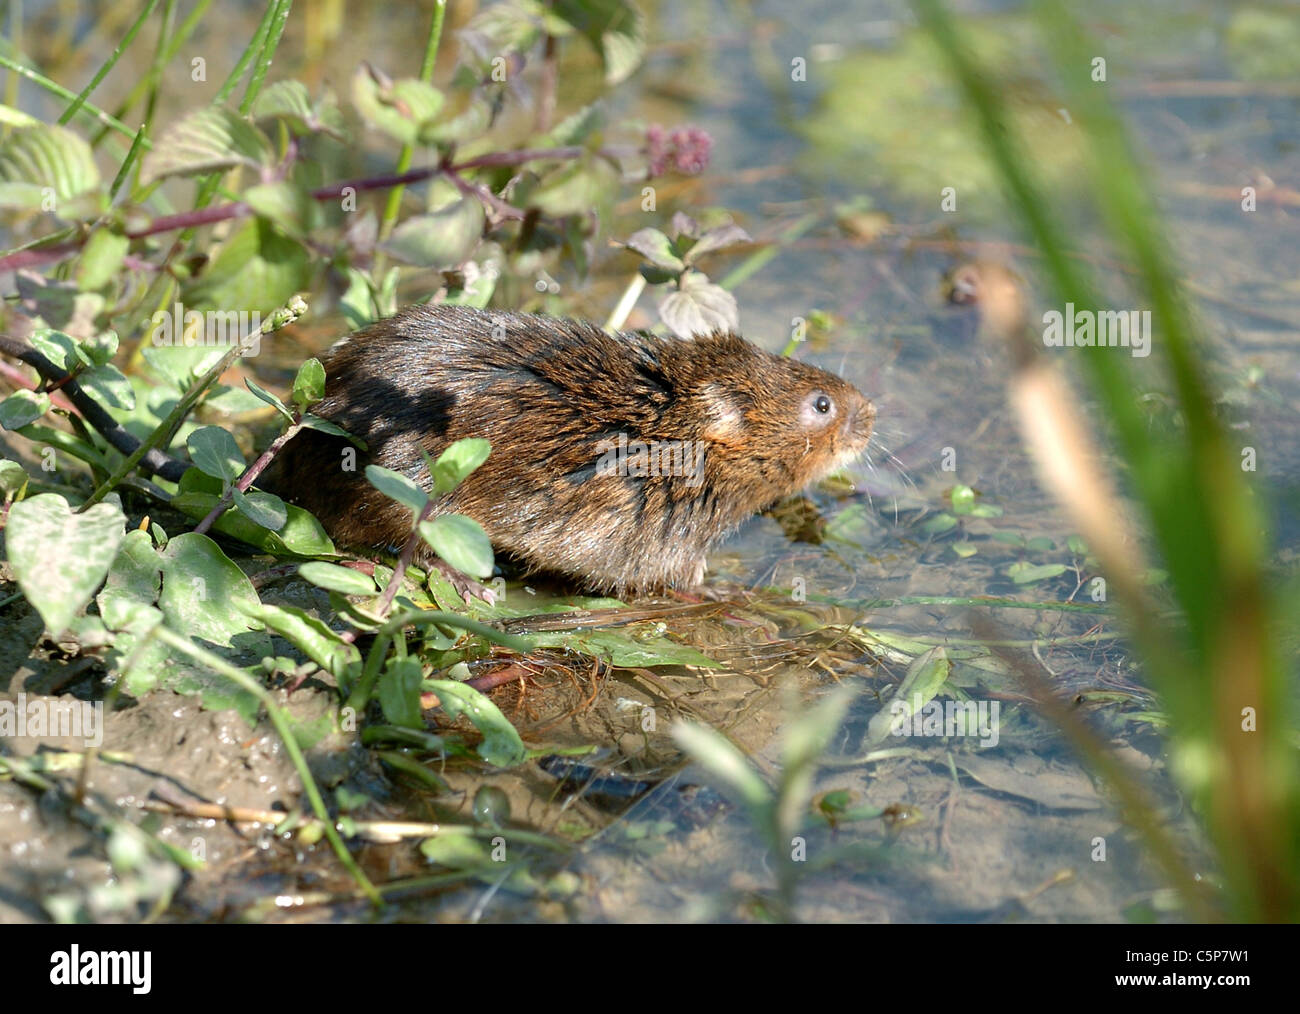 A Water Vole Viridors Voles About To Be Released Into The Waters Of Arundel Wildfowl And 